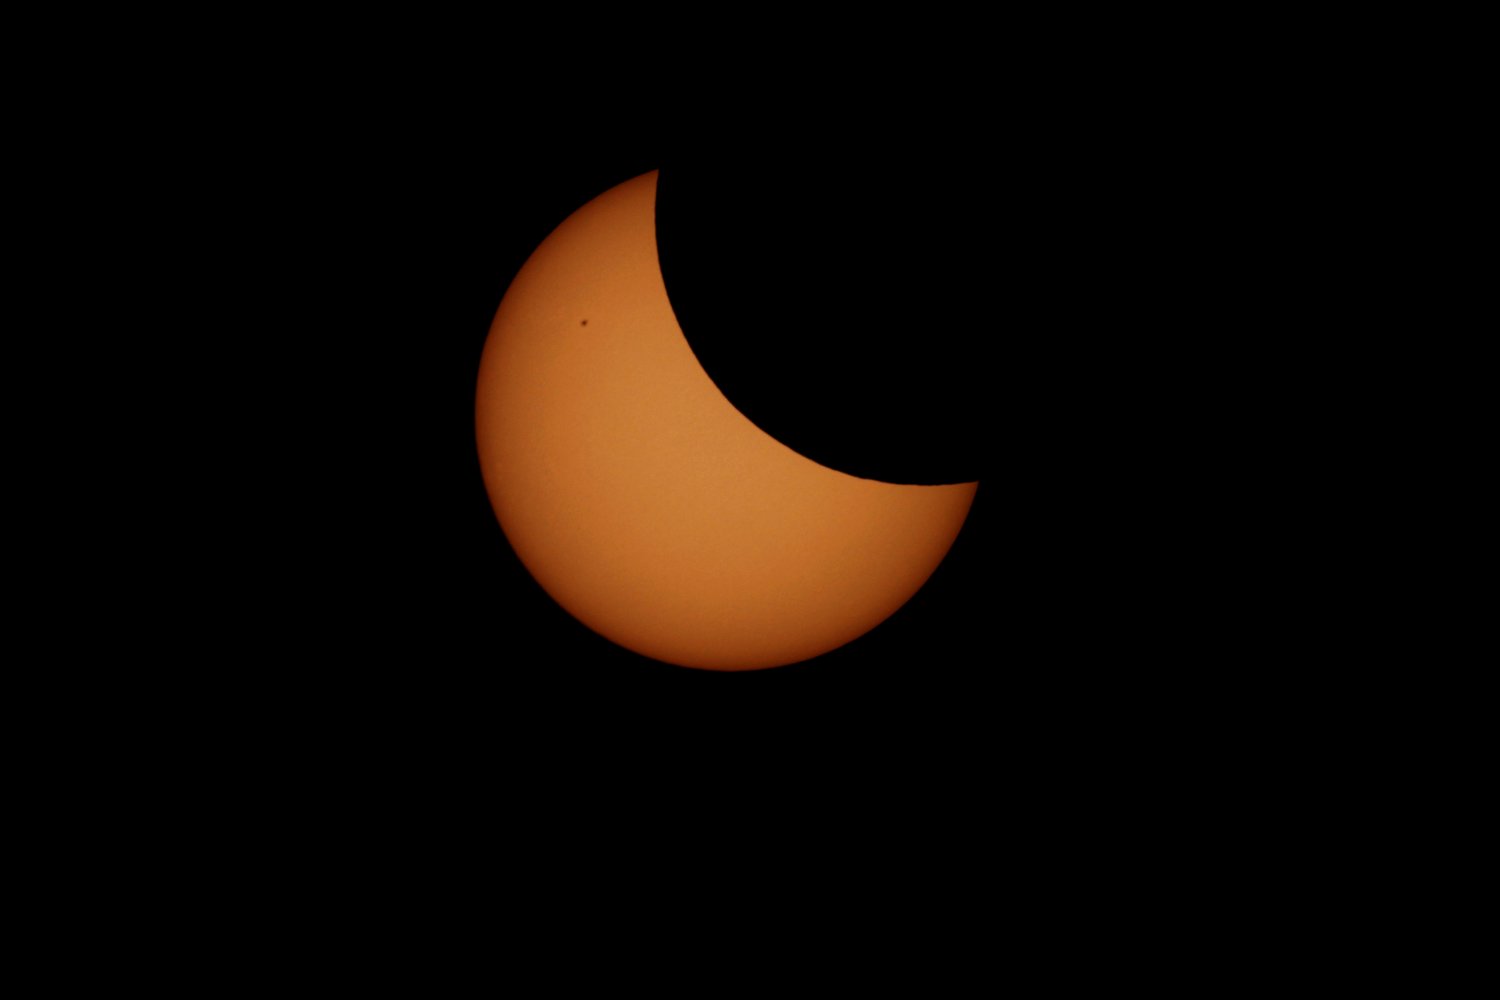 Partial eclipse 
photographed from Talmassons: 35 KB; click on the image to enlarge